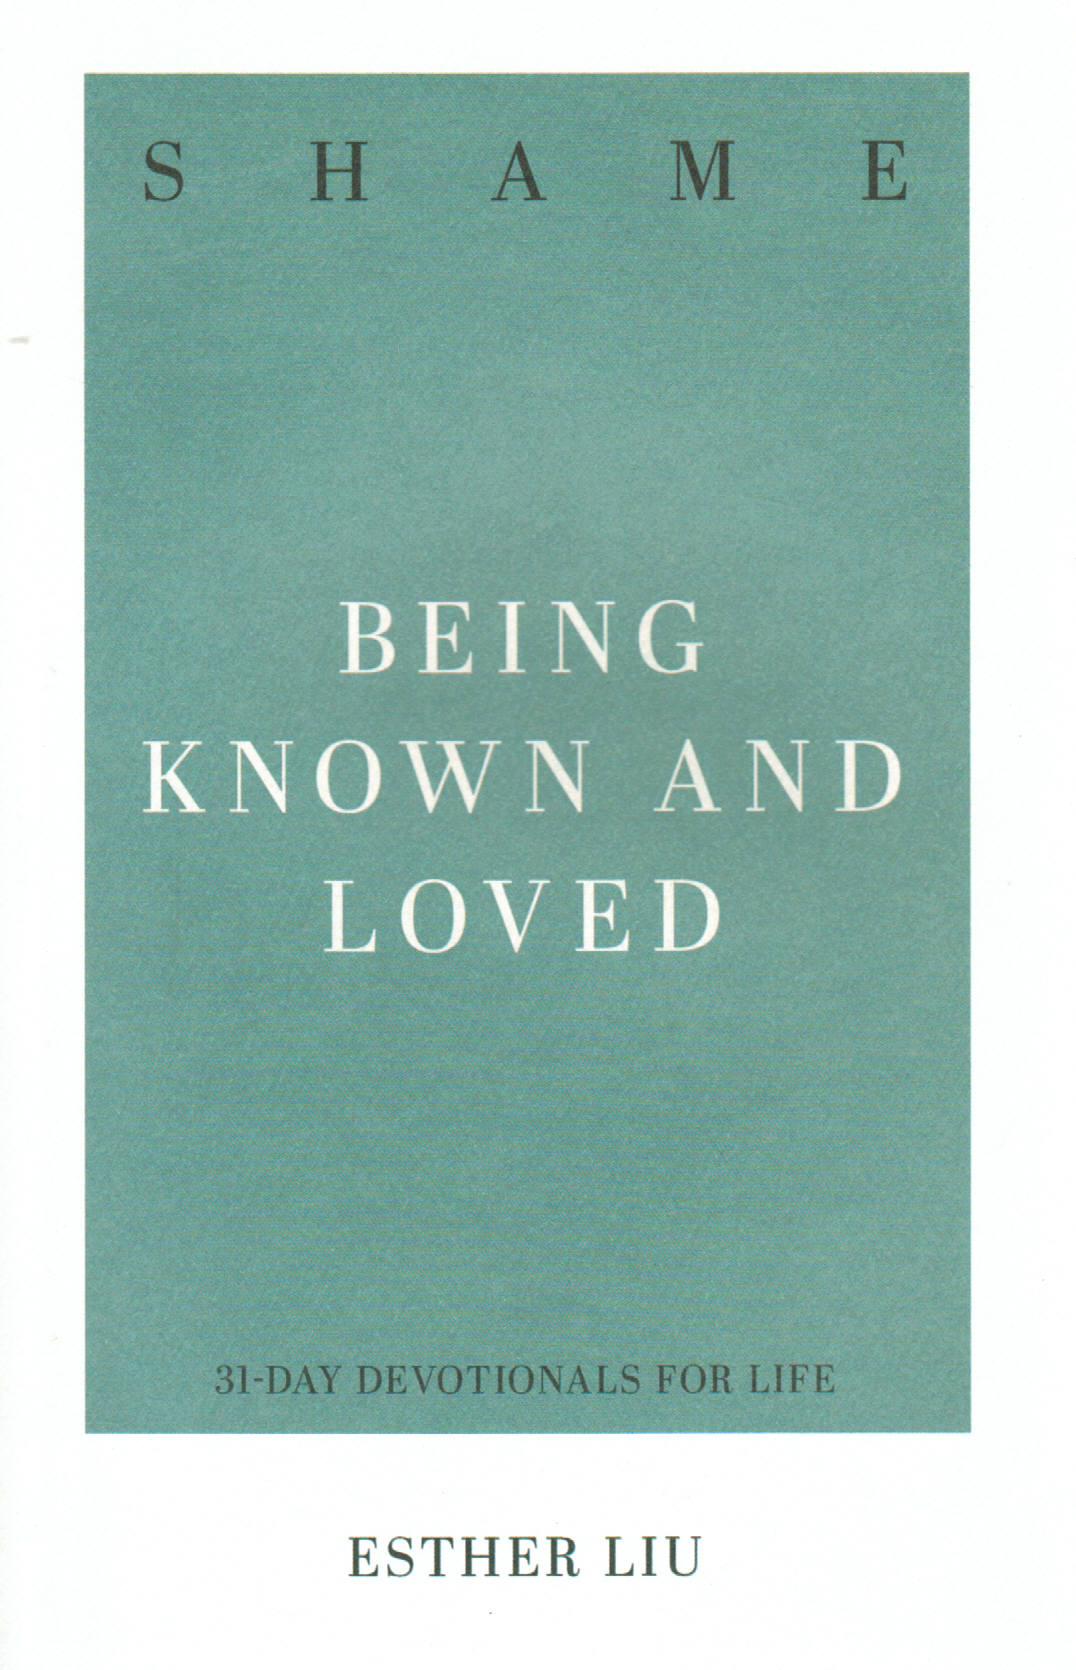 31-Day Devotionals for Life - Shame: Being Known and Loved